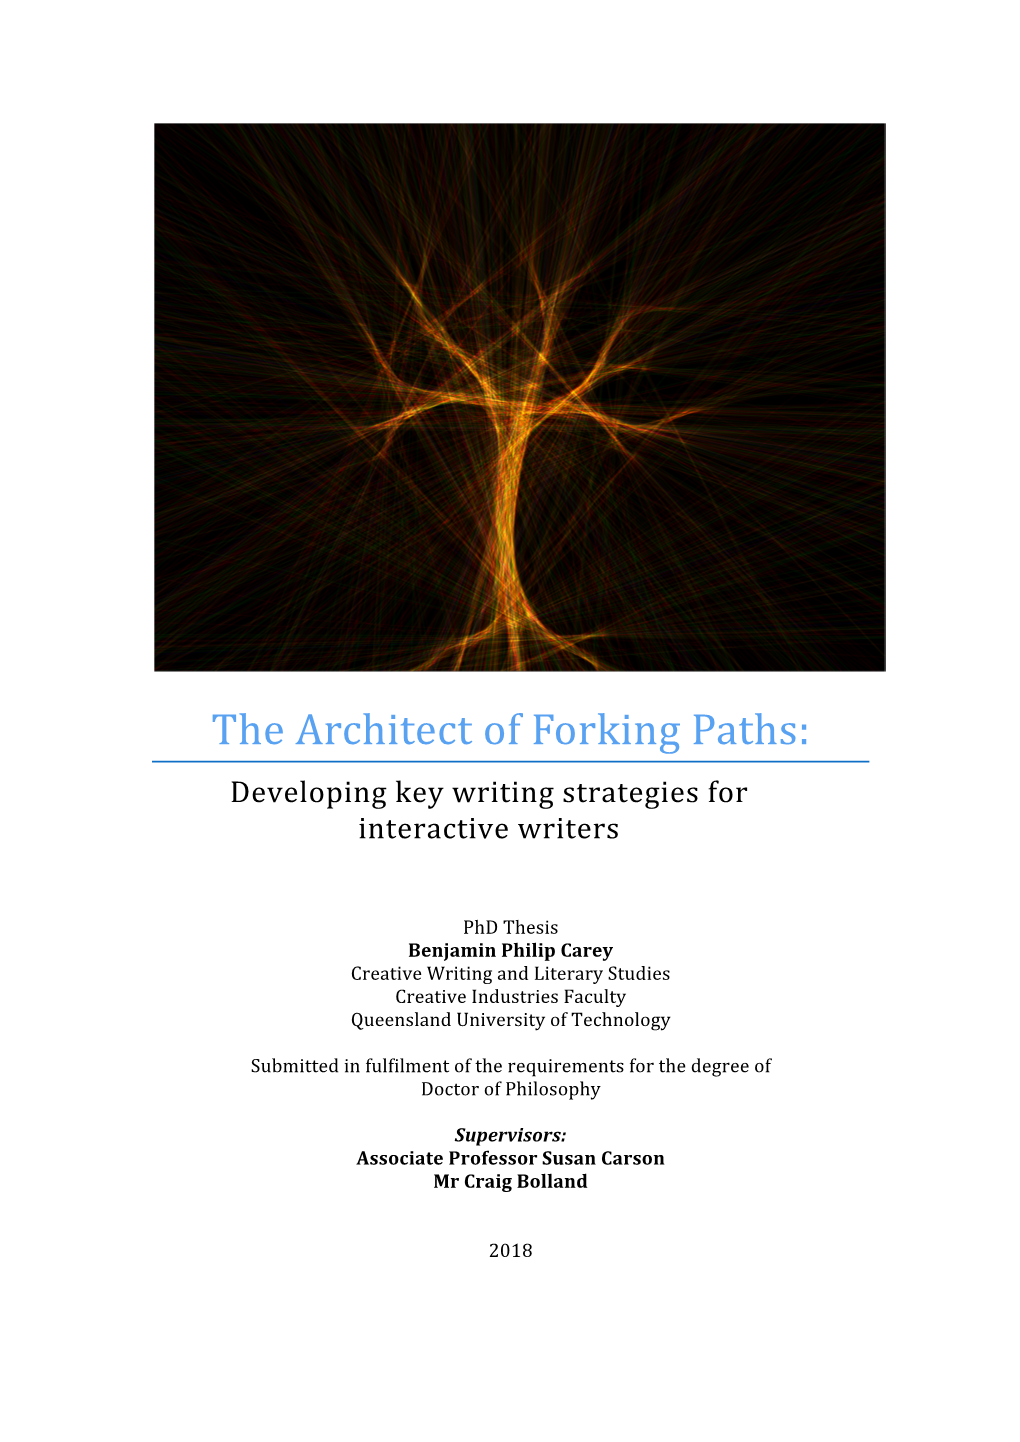 The Architect of Forking Paths: Developing Key Writing Strategies for Interactive Writers